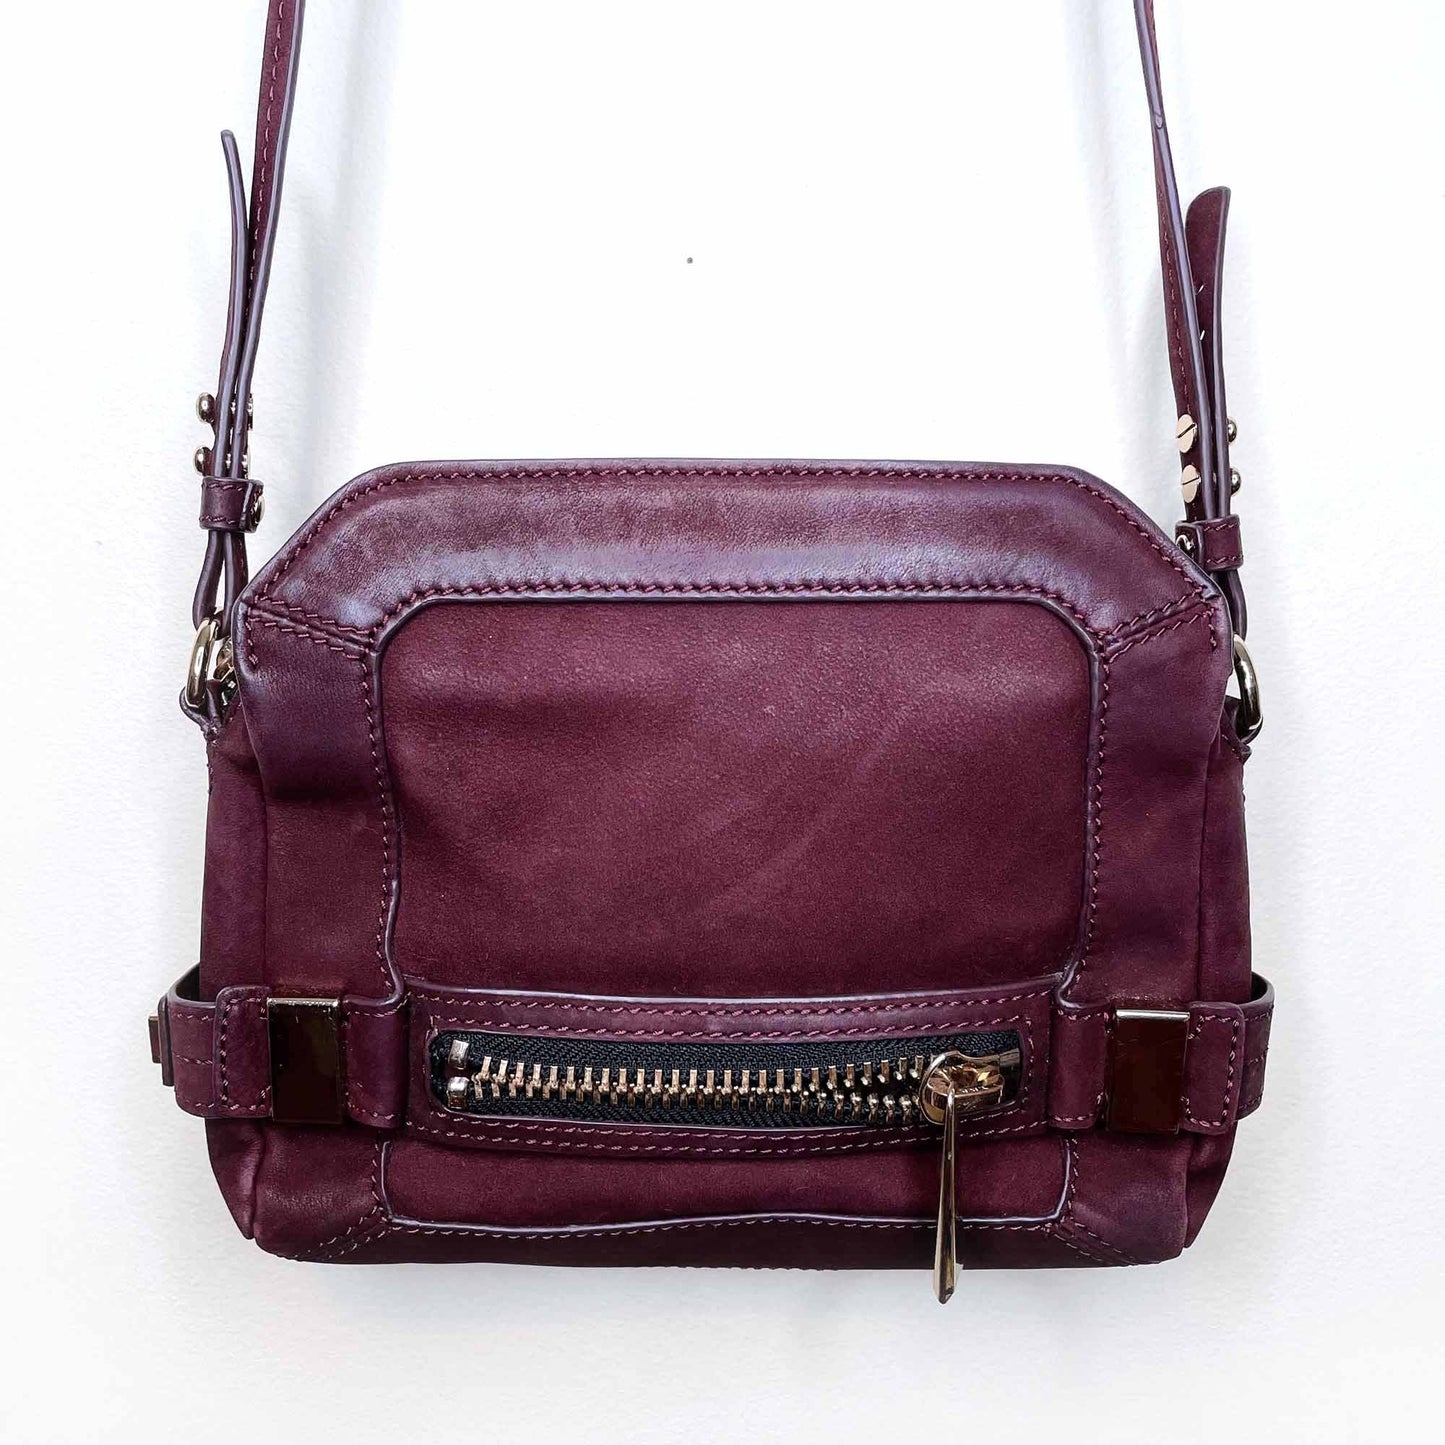 botkier leather crossbody with gold hardware